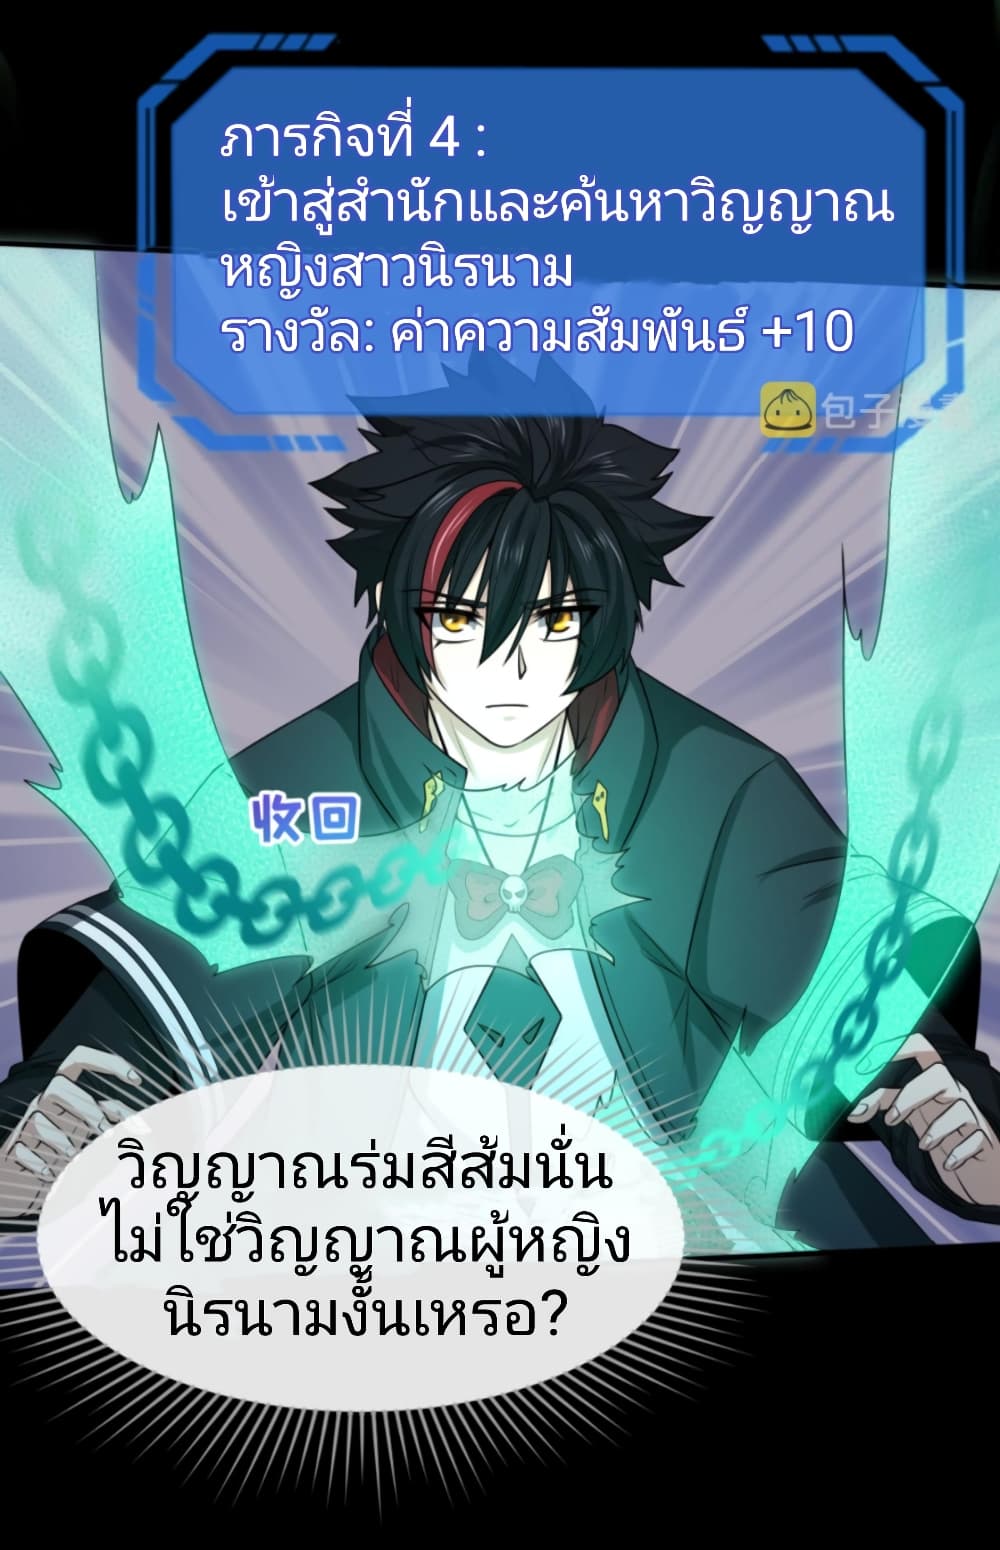 The Age of Ghost Spirits à¸à¸­à¸à¸à¸µà¹ 43 (23)